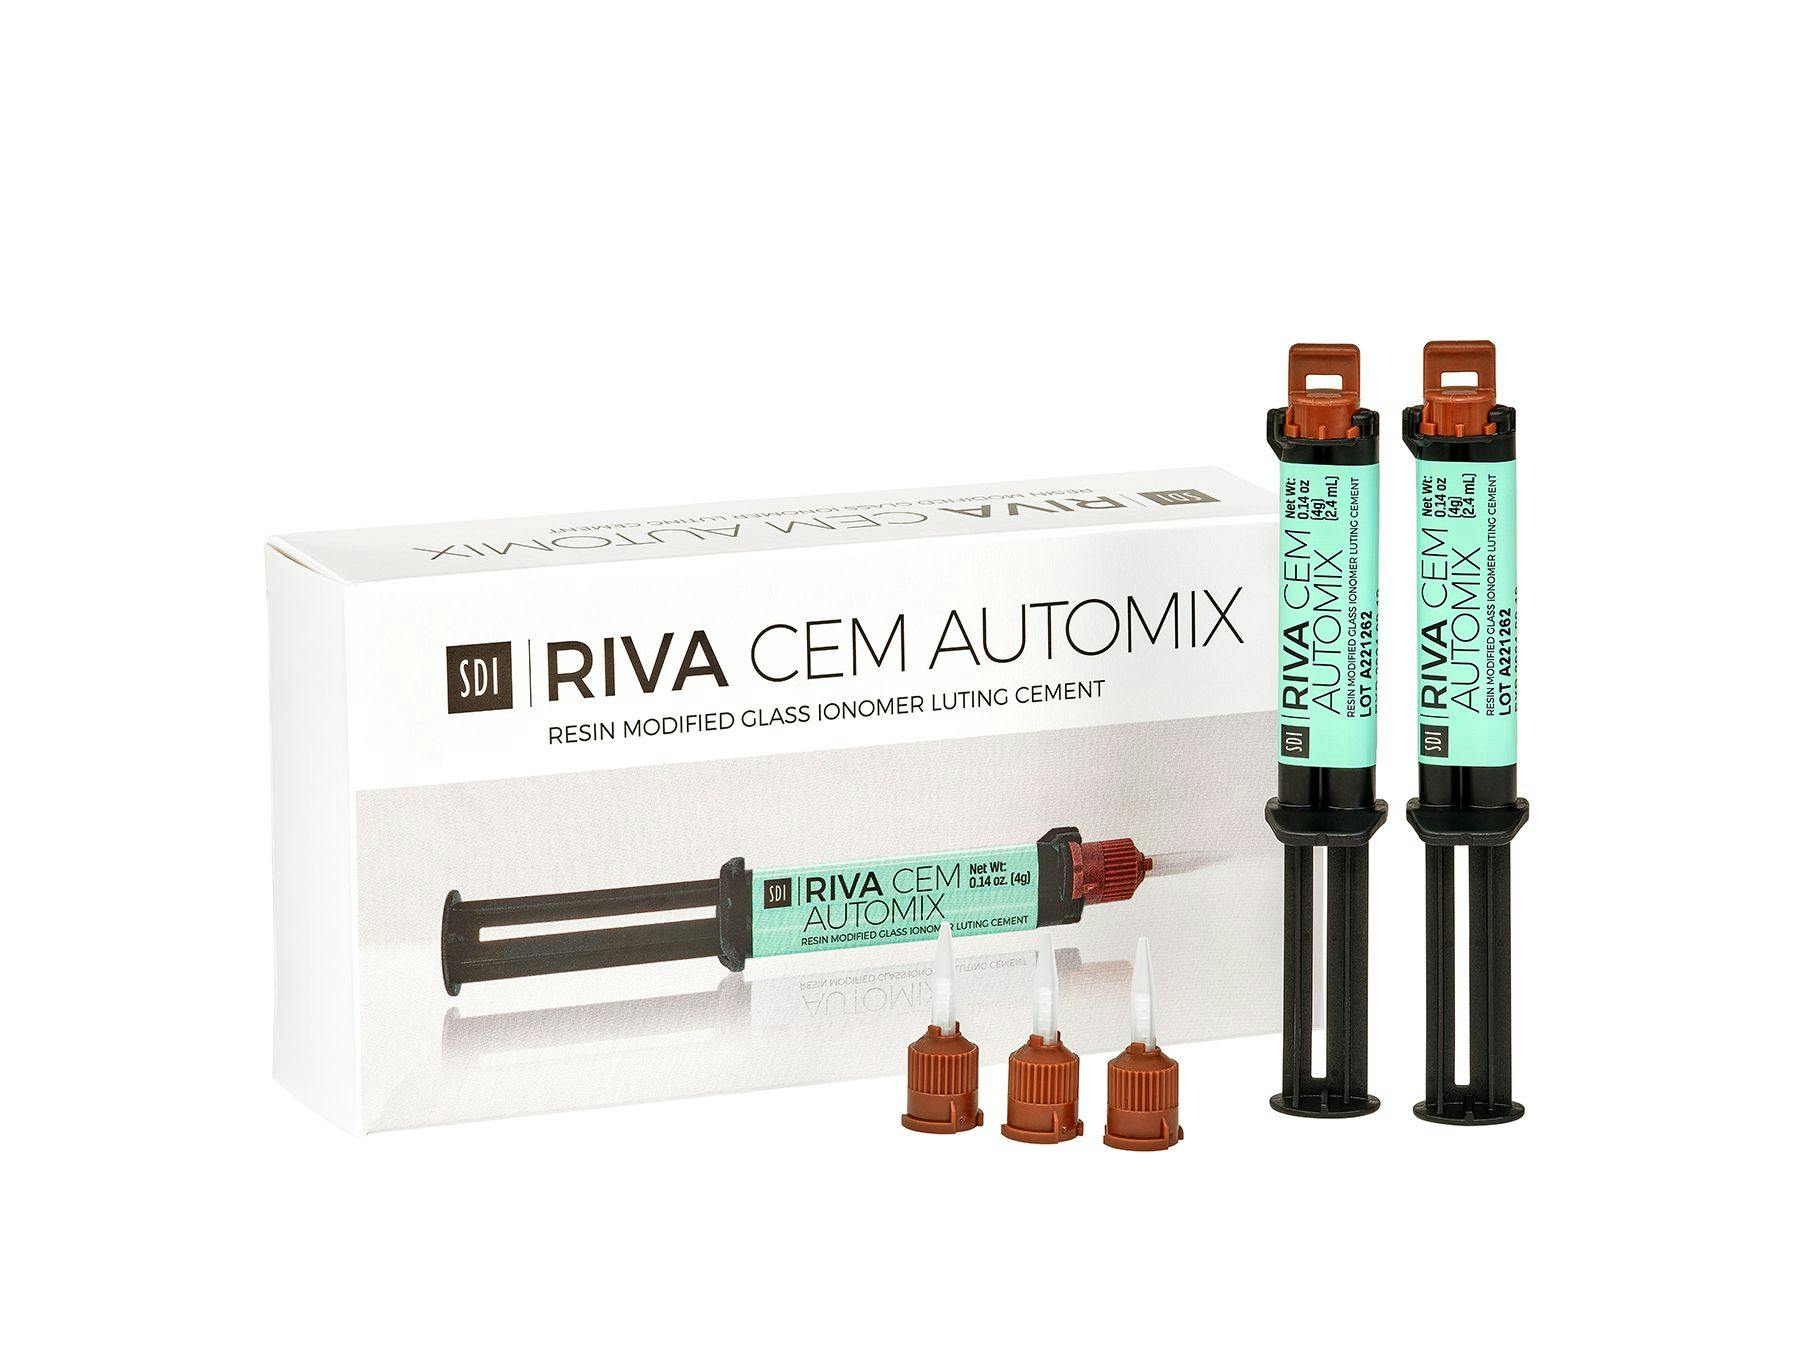 SDI Launches New Riva Cem Automix Resin Modified Glass Ionomer Cement | Image Credit: © SDI Limited